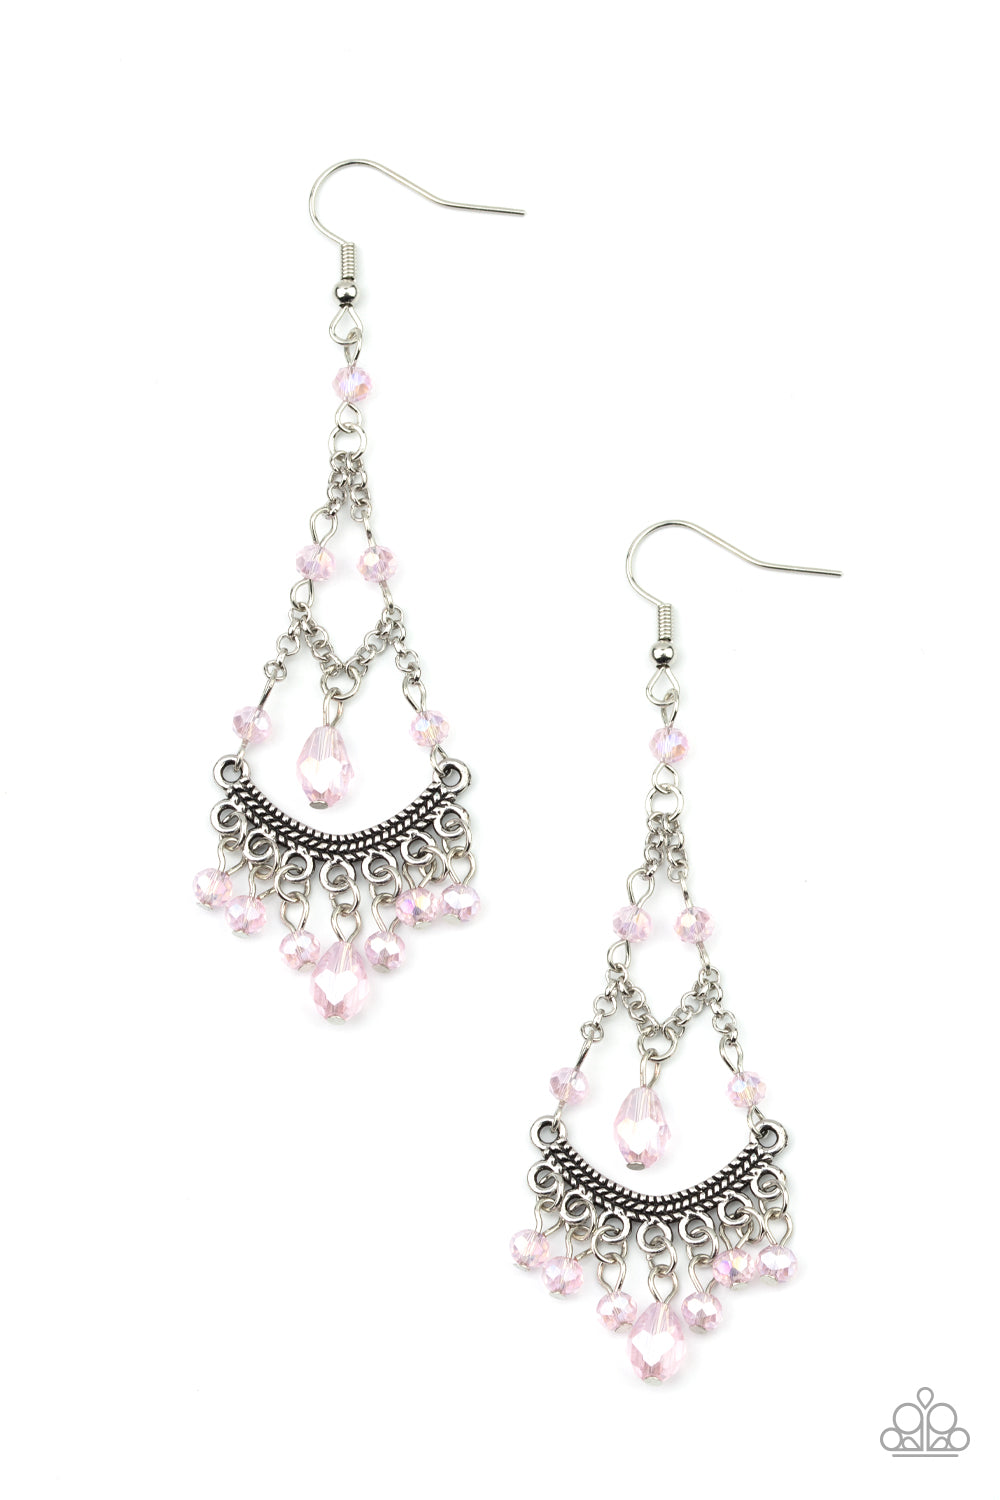 Featuring an iridescent shimmer, a glittery collection of pink crystal-like beads link with shimmery silver chains that give way to a studded silver bar and colorful fringe. Earring attaches to a standard fishhook fitting.  Sold as one pair of earrings.